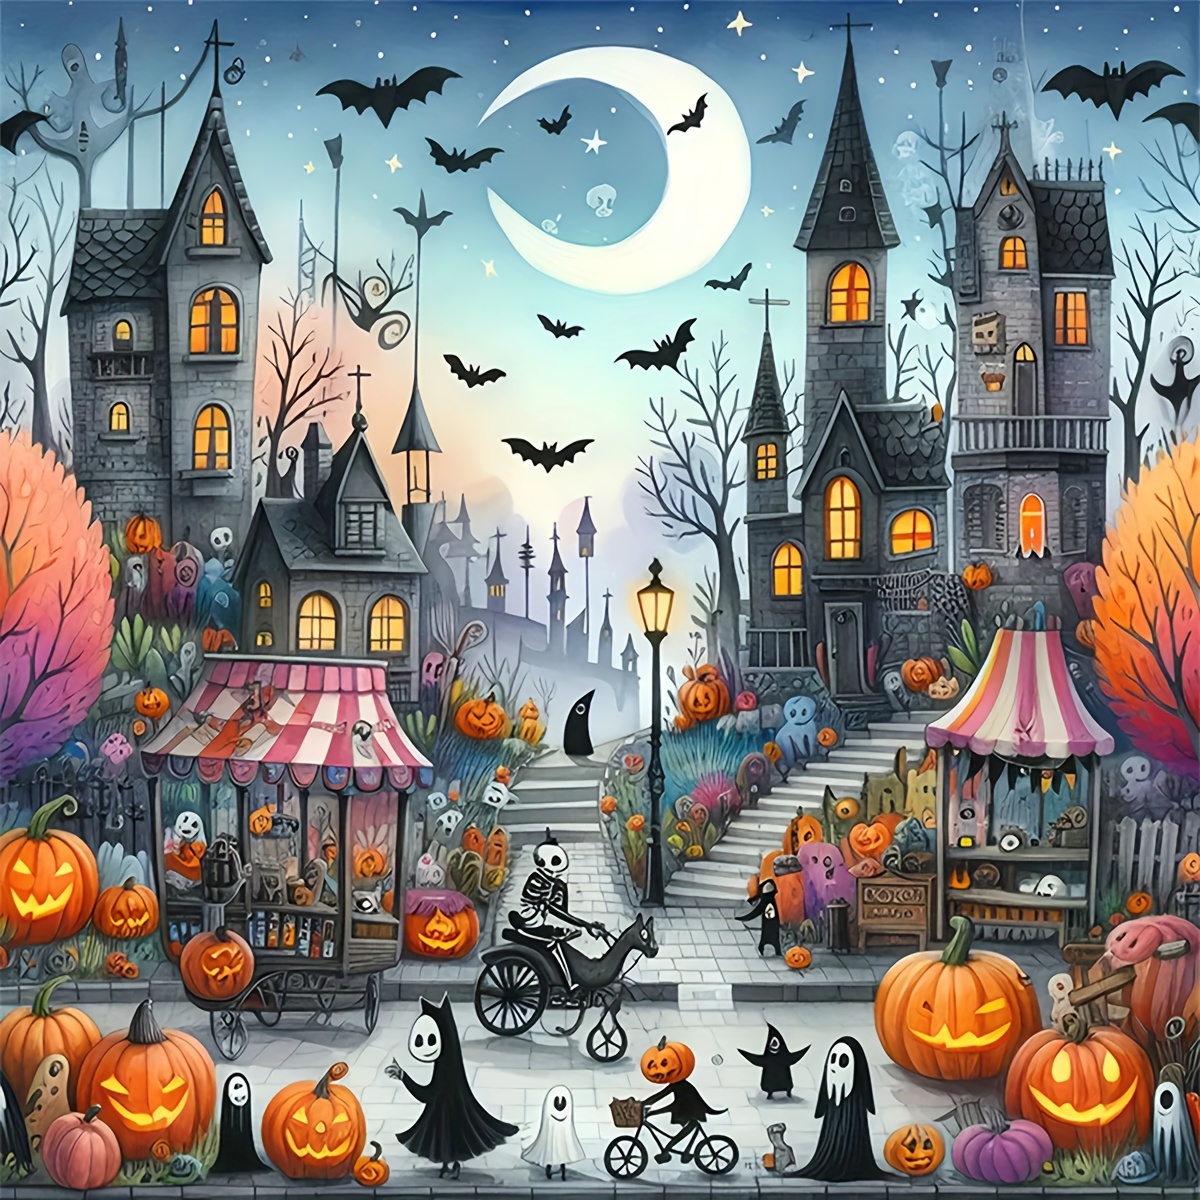 

Halloween Town 5d Diamond Painting Kit 30x30cm, Diy Full Round Drill Embroidery Cross Stitch, Acrylic Pmma Diamond Art For Home Wall Decor, Frameless Unique Gift